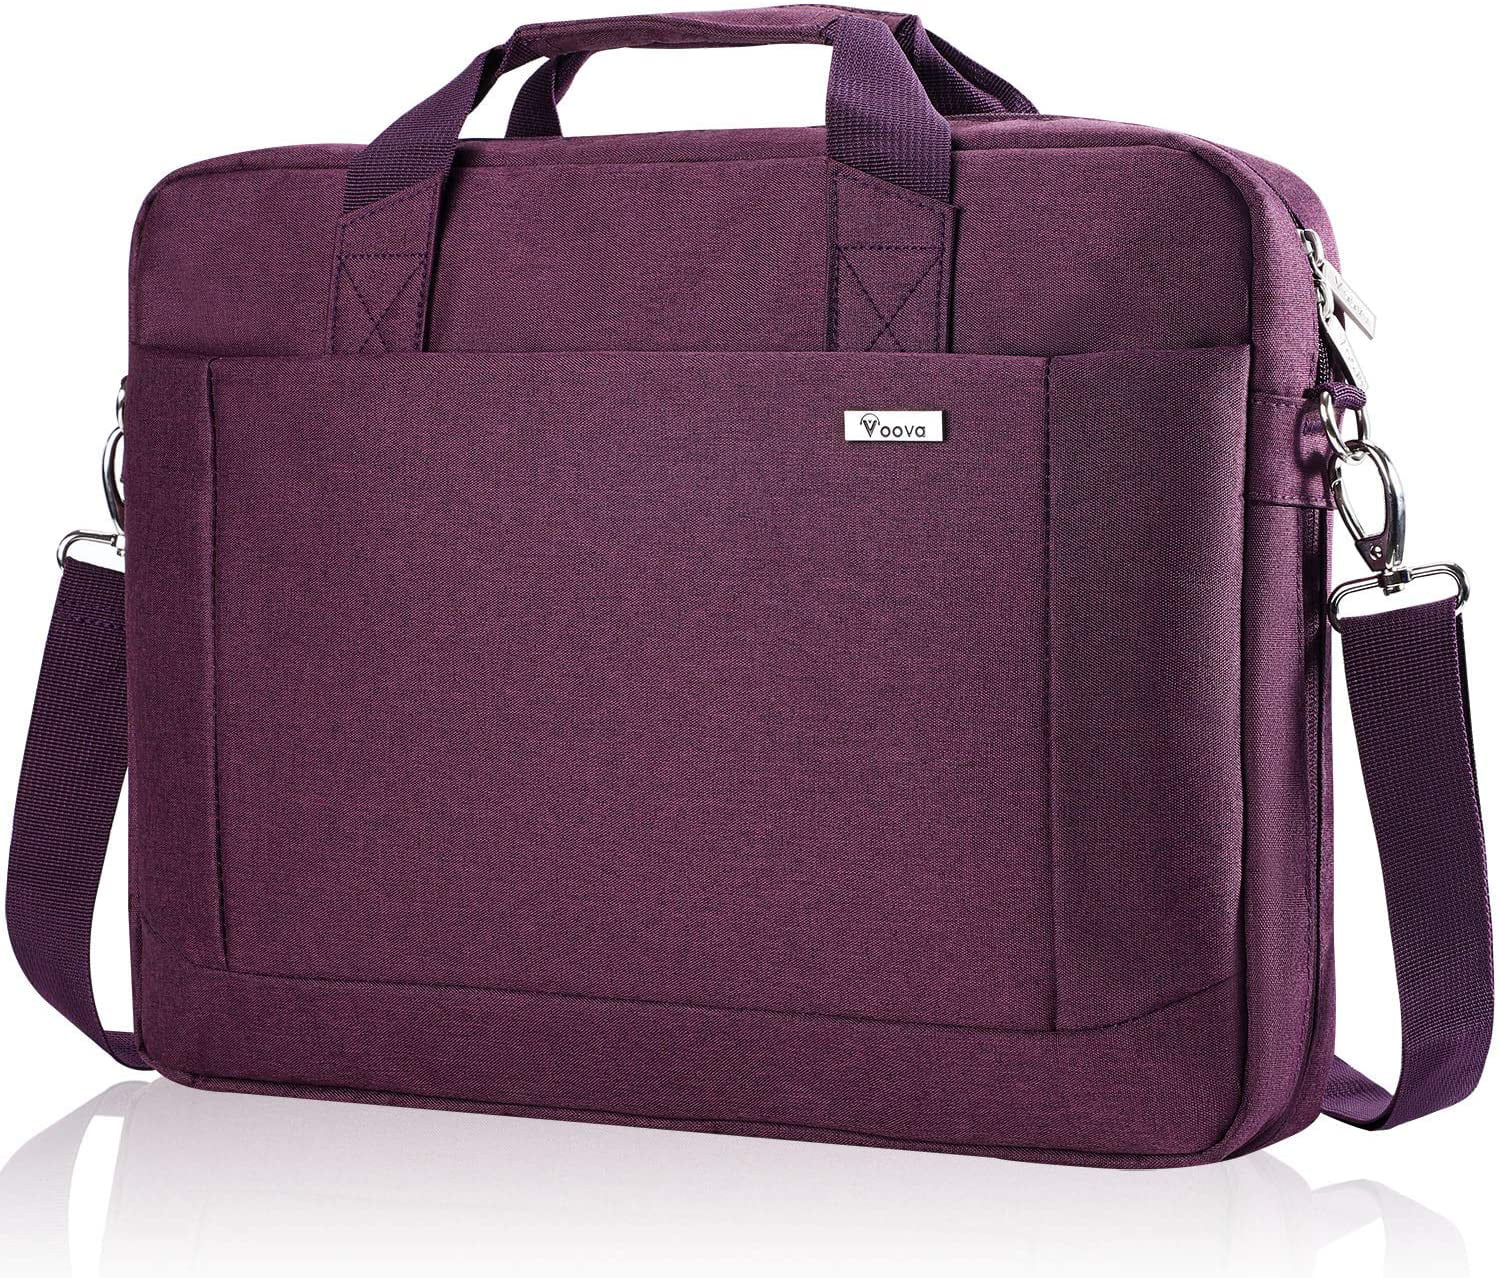 15.6 Inch Laptop Case Expandable Computer Carrying Briefcase with Shoulder Strap for School Business Travel Pink Laptop Bag for Women 